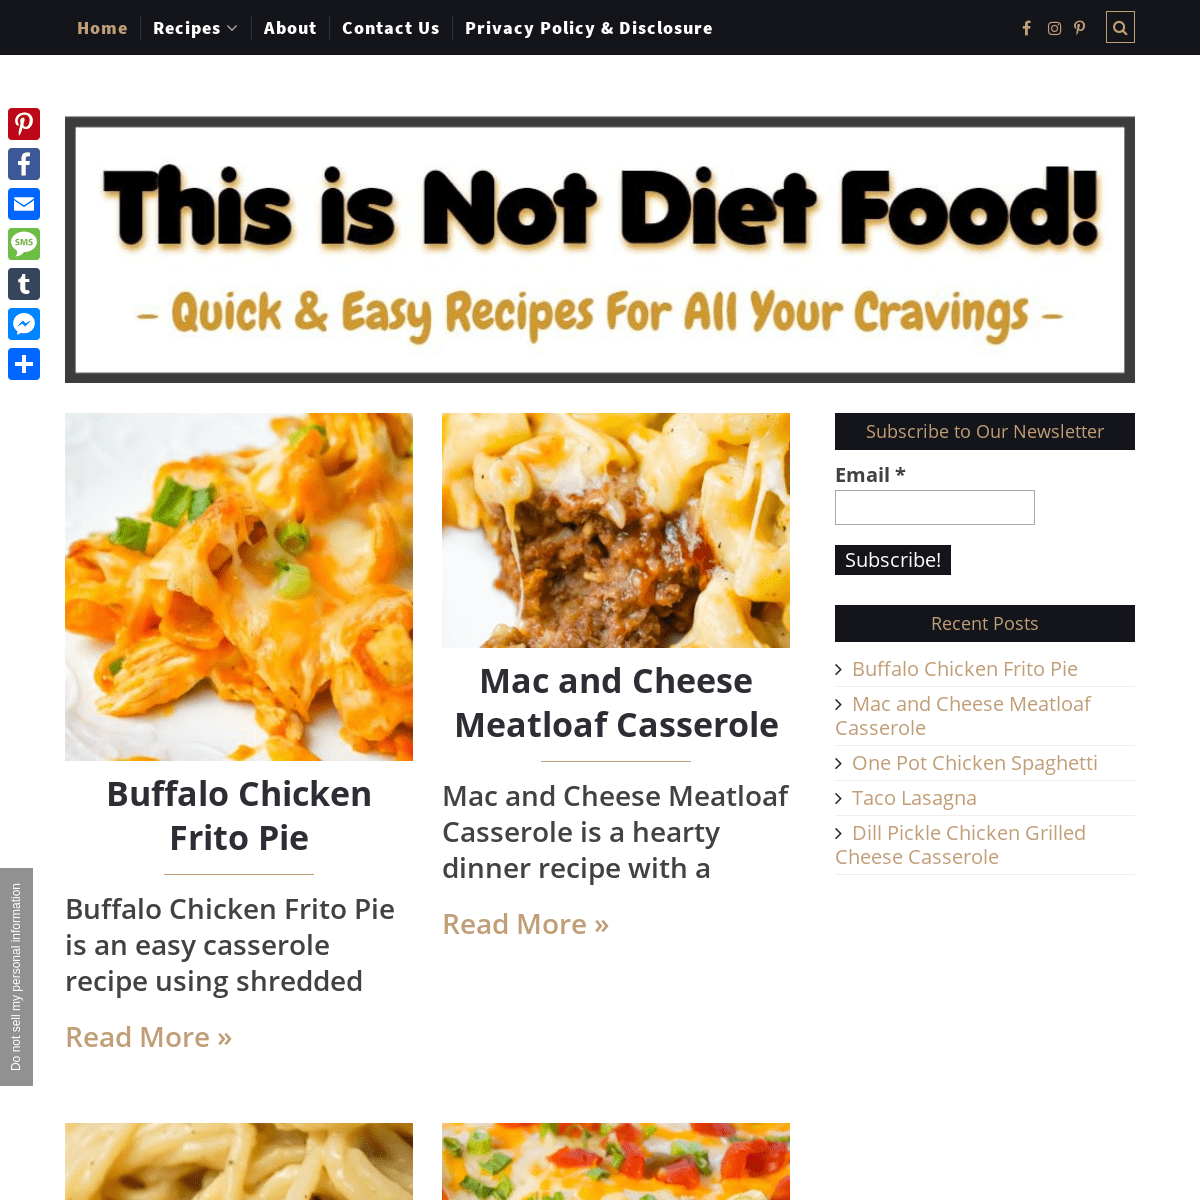 A complete backup of thisisnotdietfood.com